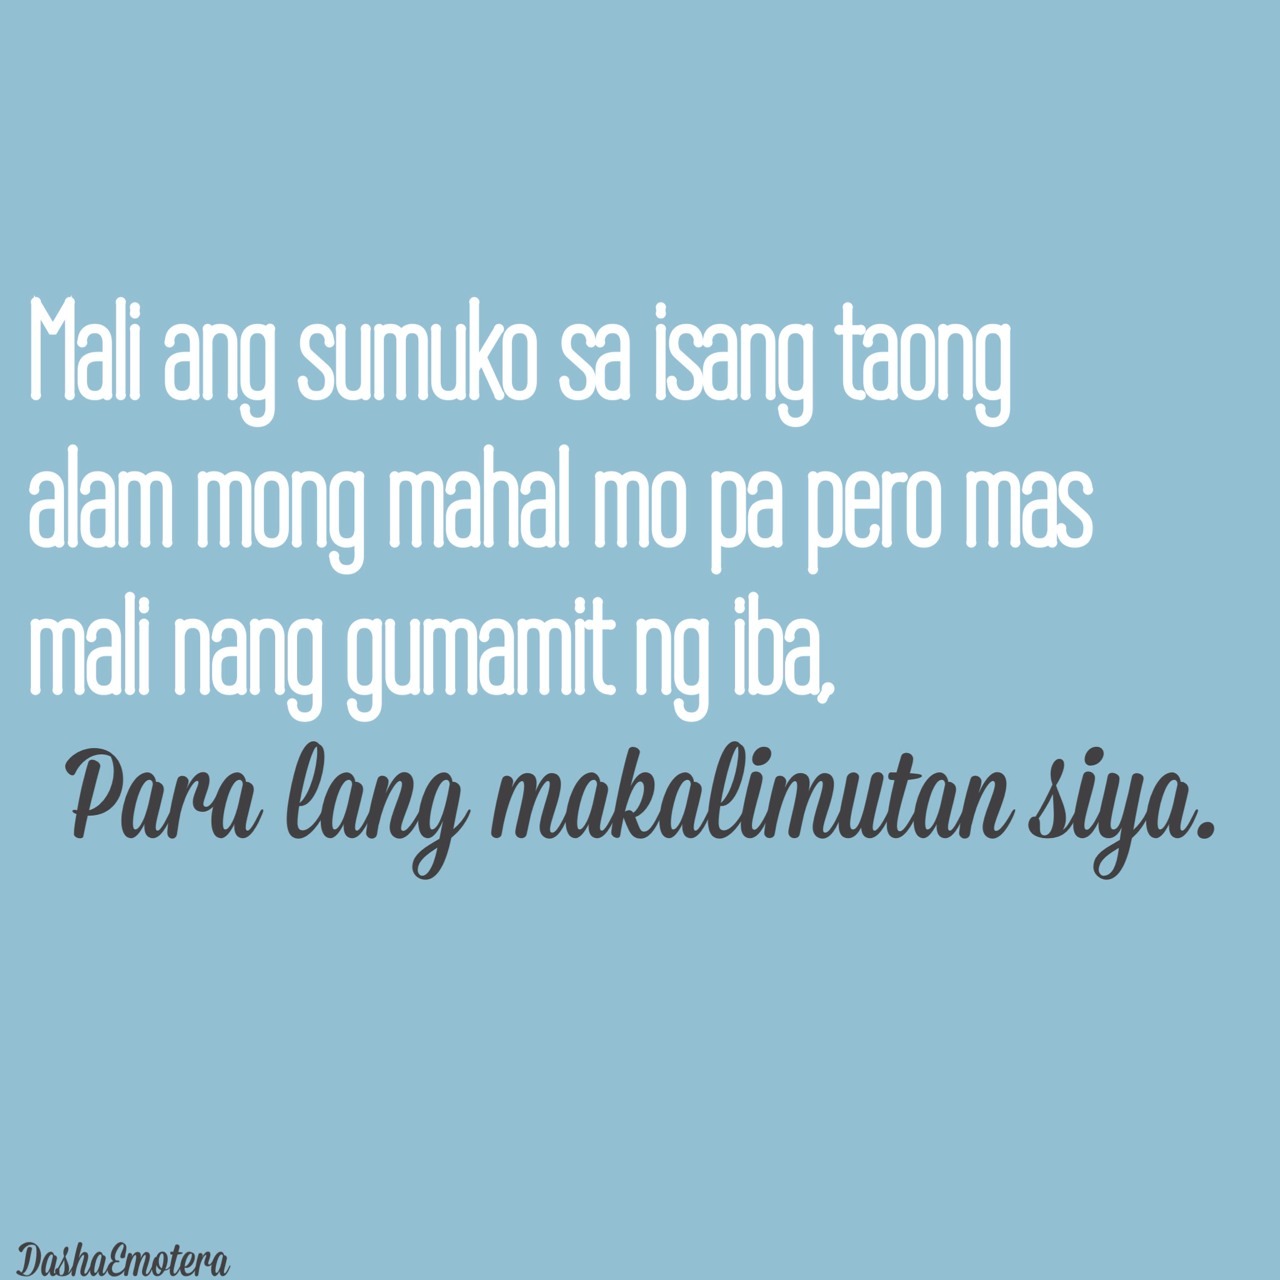 Quotes About Yourself Tagalog Tumblr ~ Self Quotes Tumblr - Viewing ...